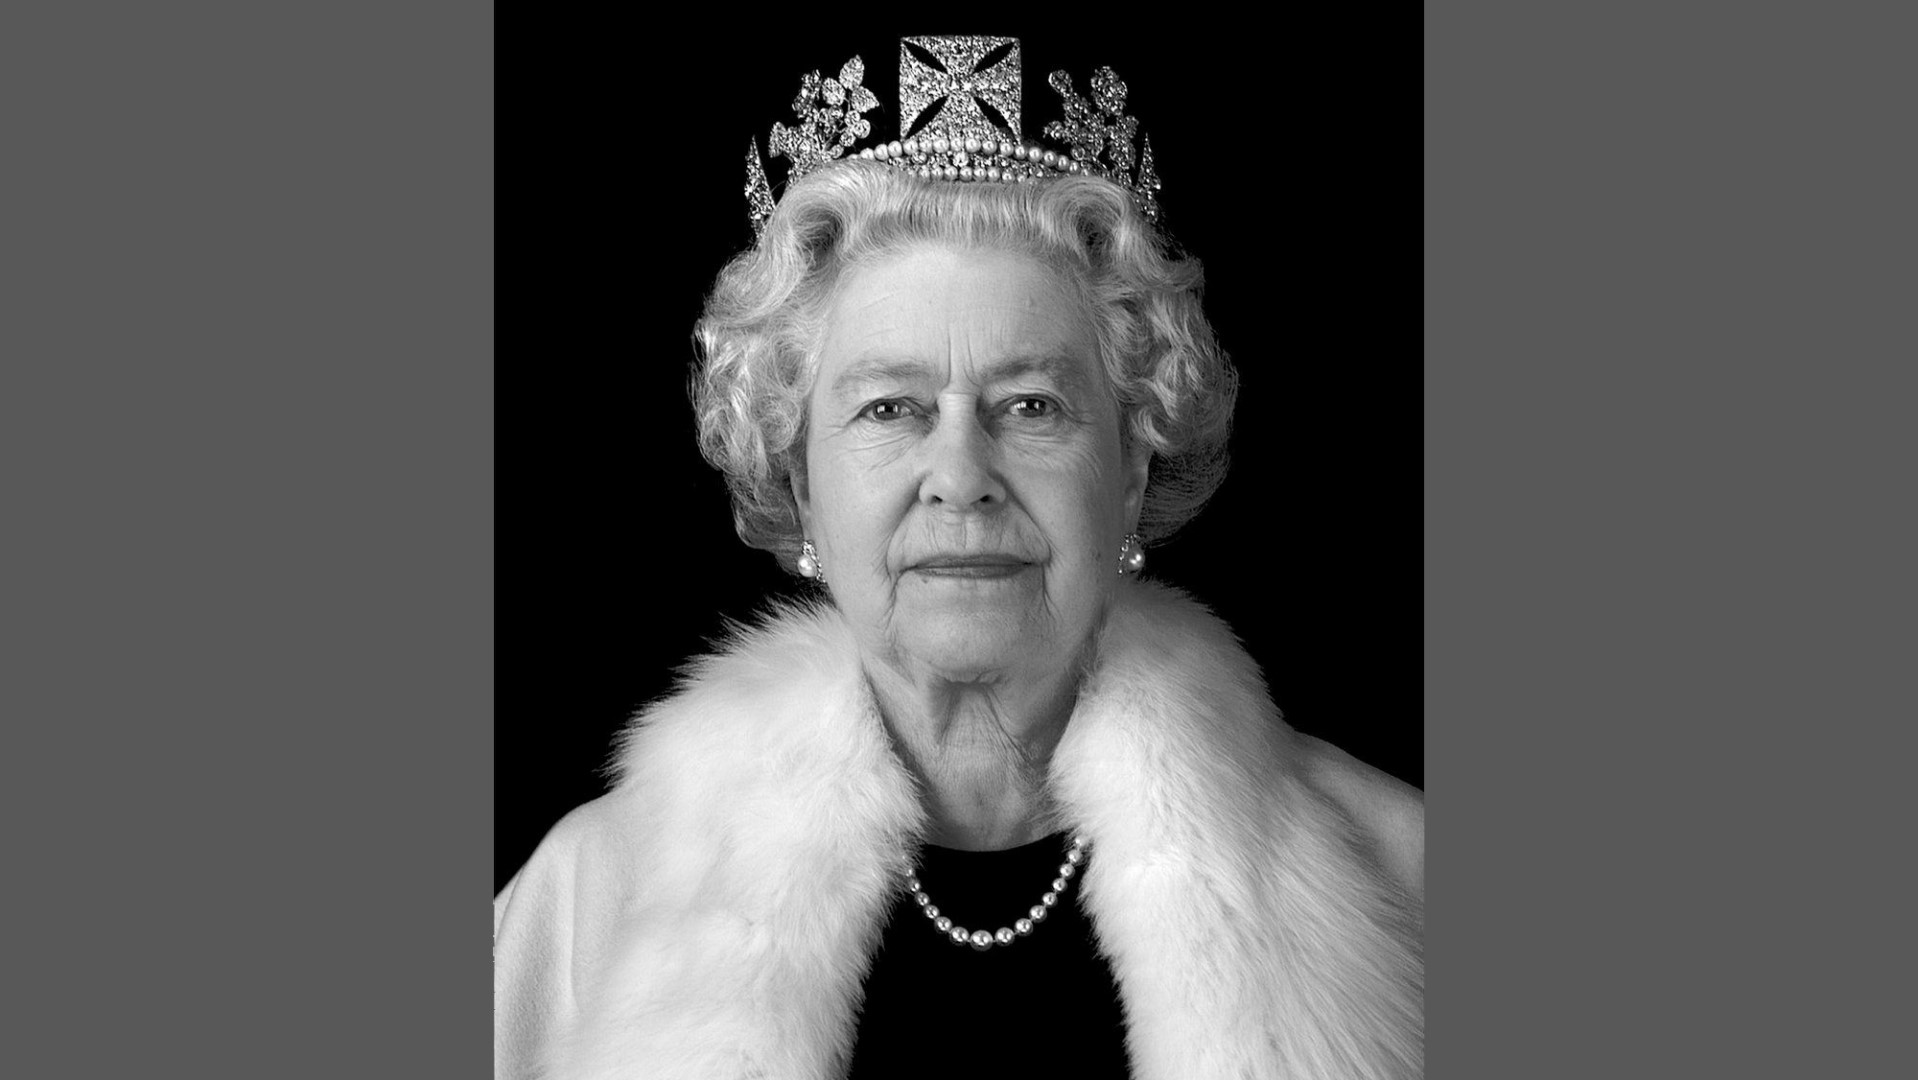 The Queen has died, palace announces